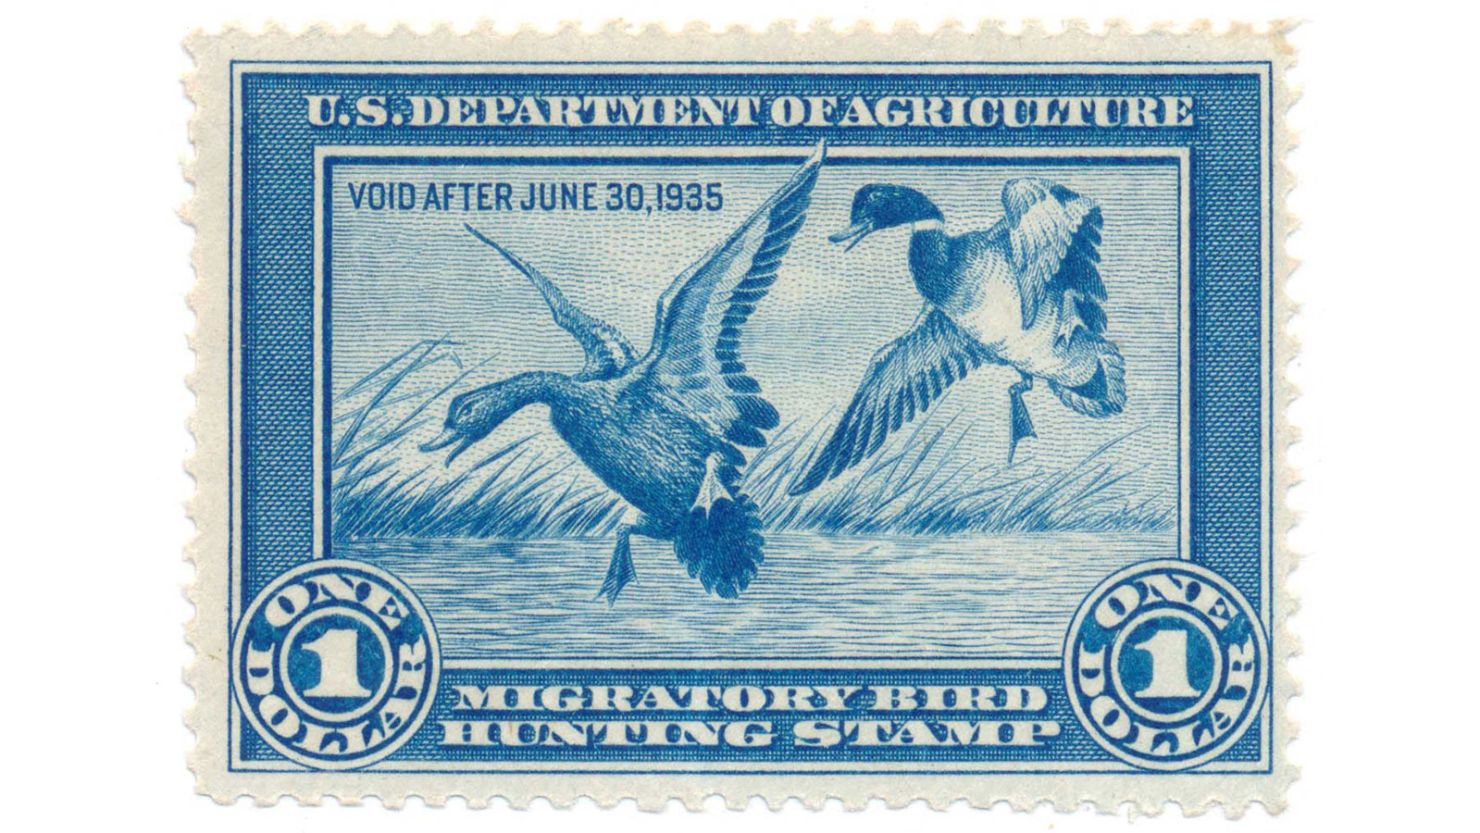 The first United States Duck Stamp, issued August 14, 1934.